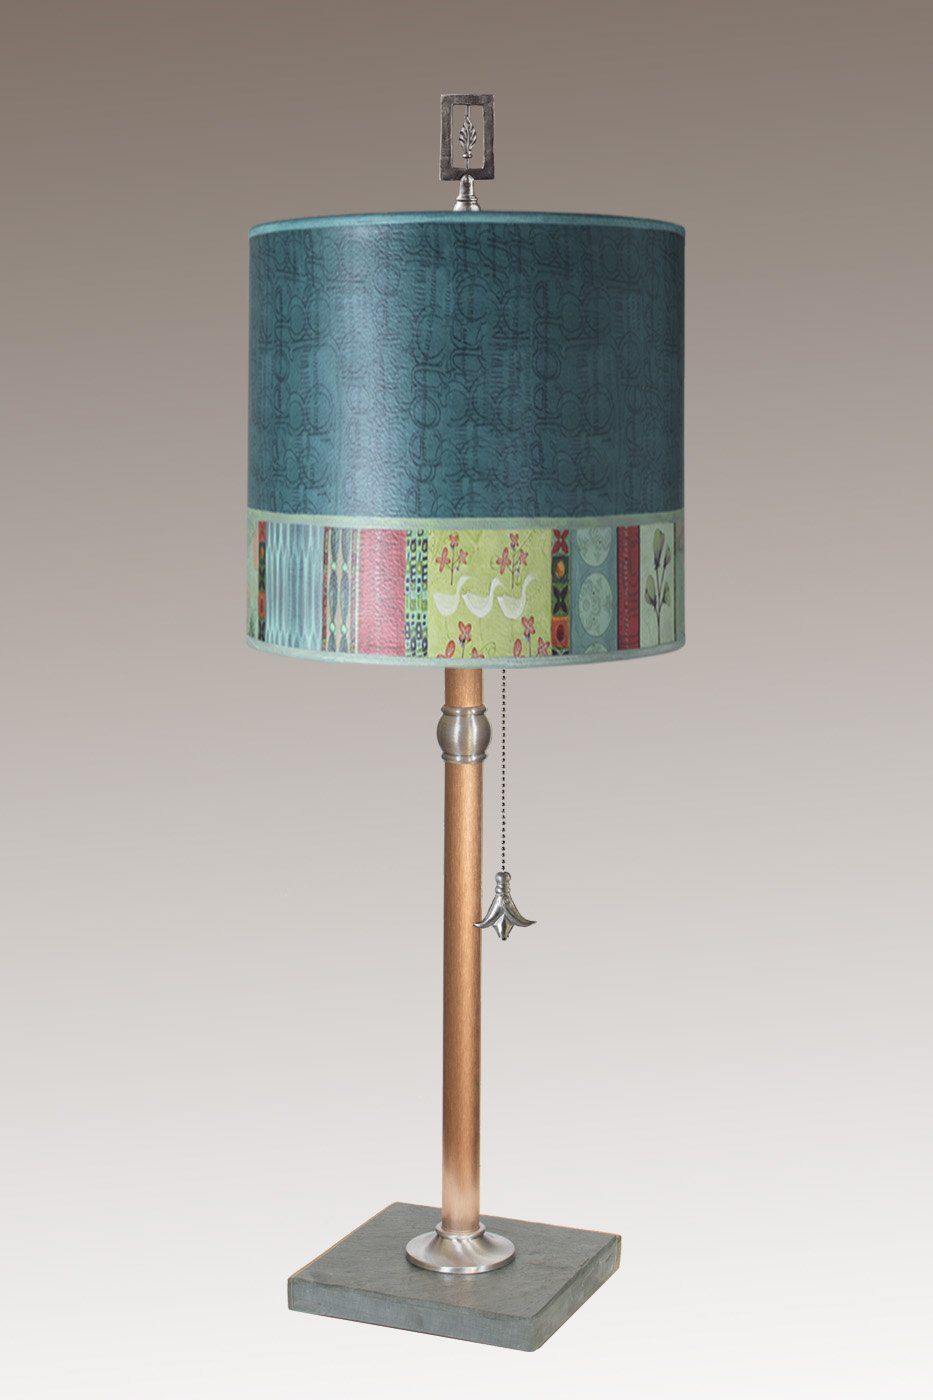 Janna Ugone & Co Table Lamps Copper Table Lamp with Medium Drum Shade in Melody in Jade